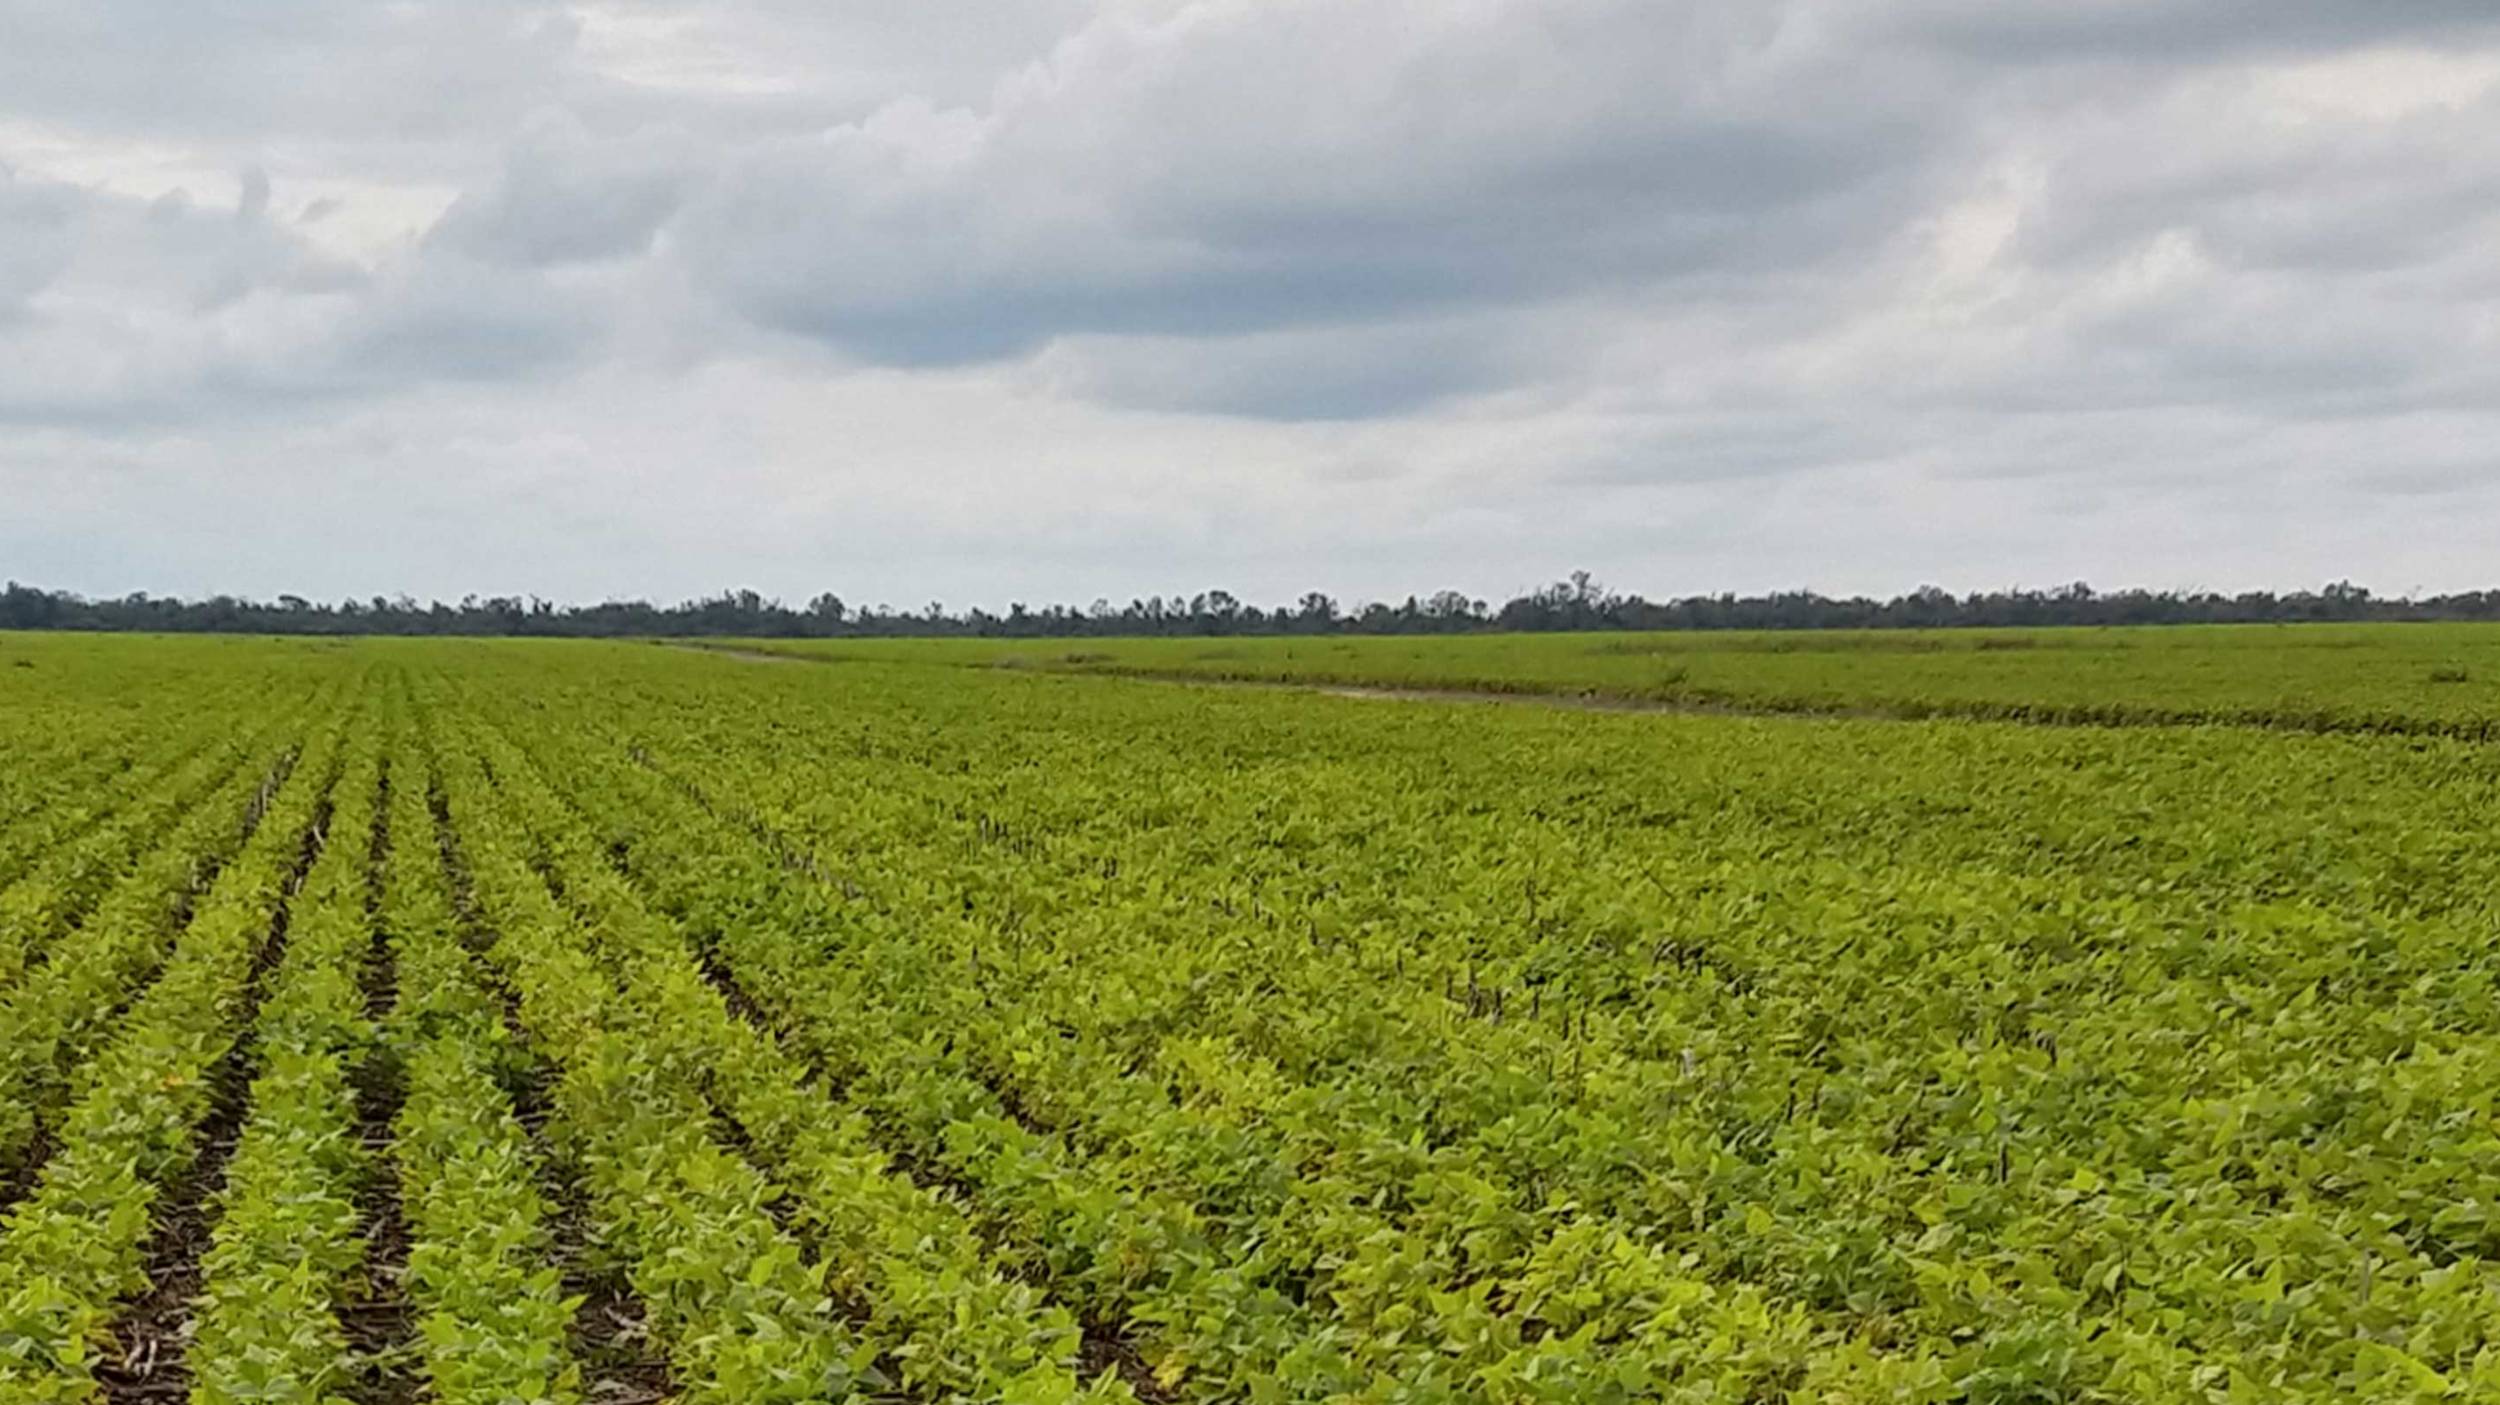 In Argentina, the growing conditions for light red kidney beans are ideal.